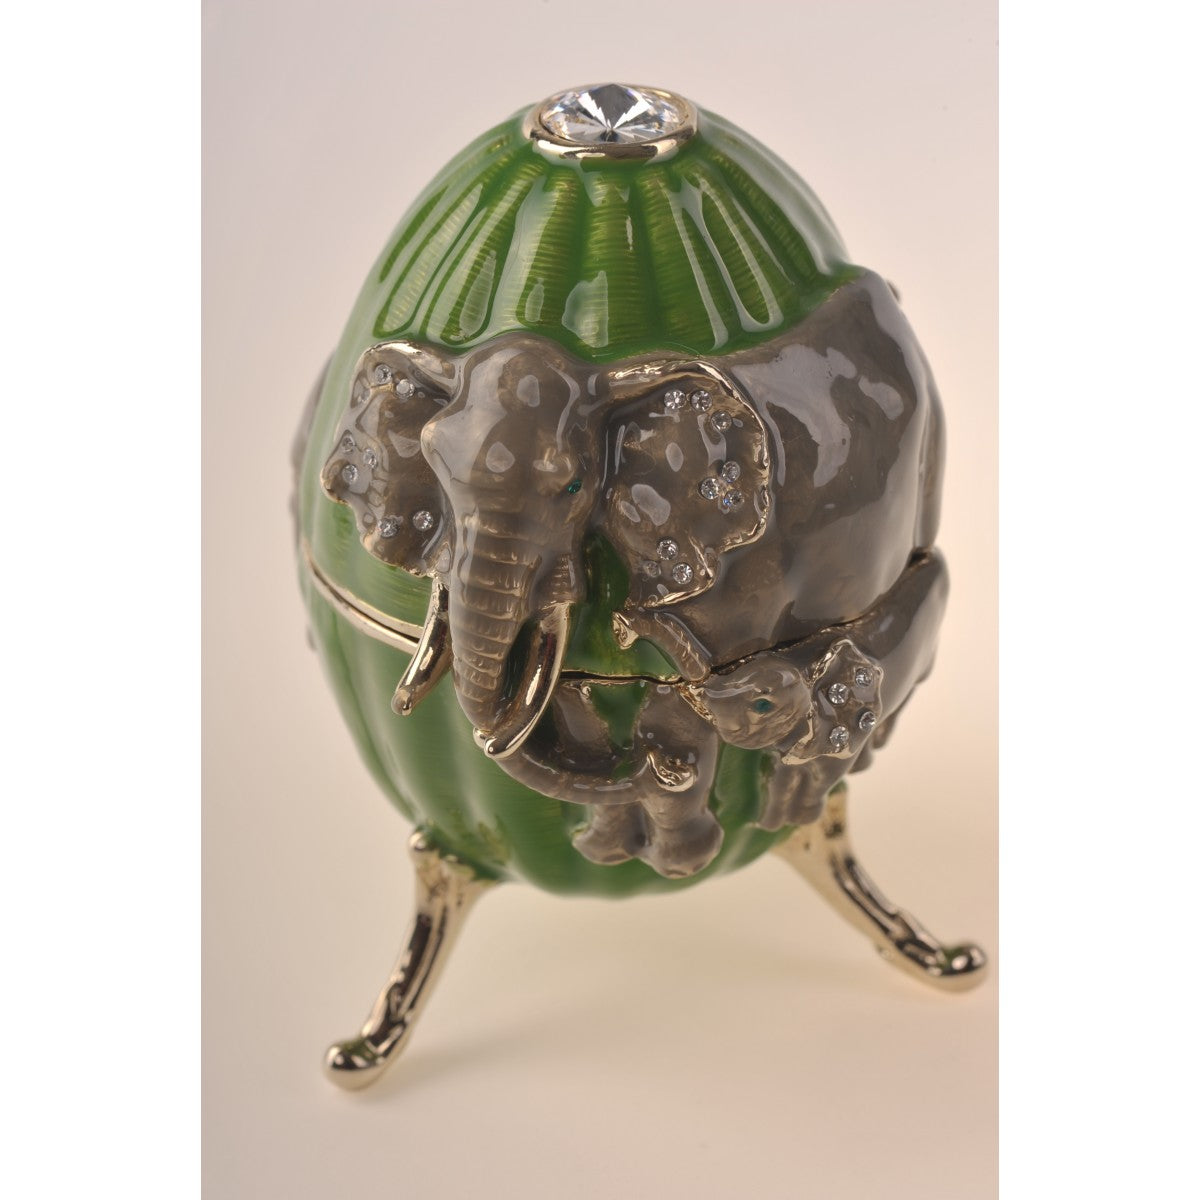 Faberge egg with turtles & pedant turtle inside